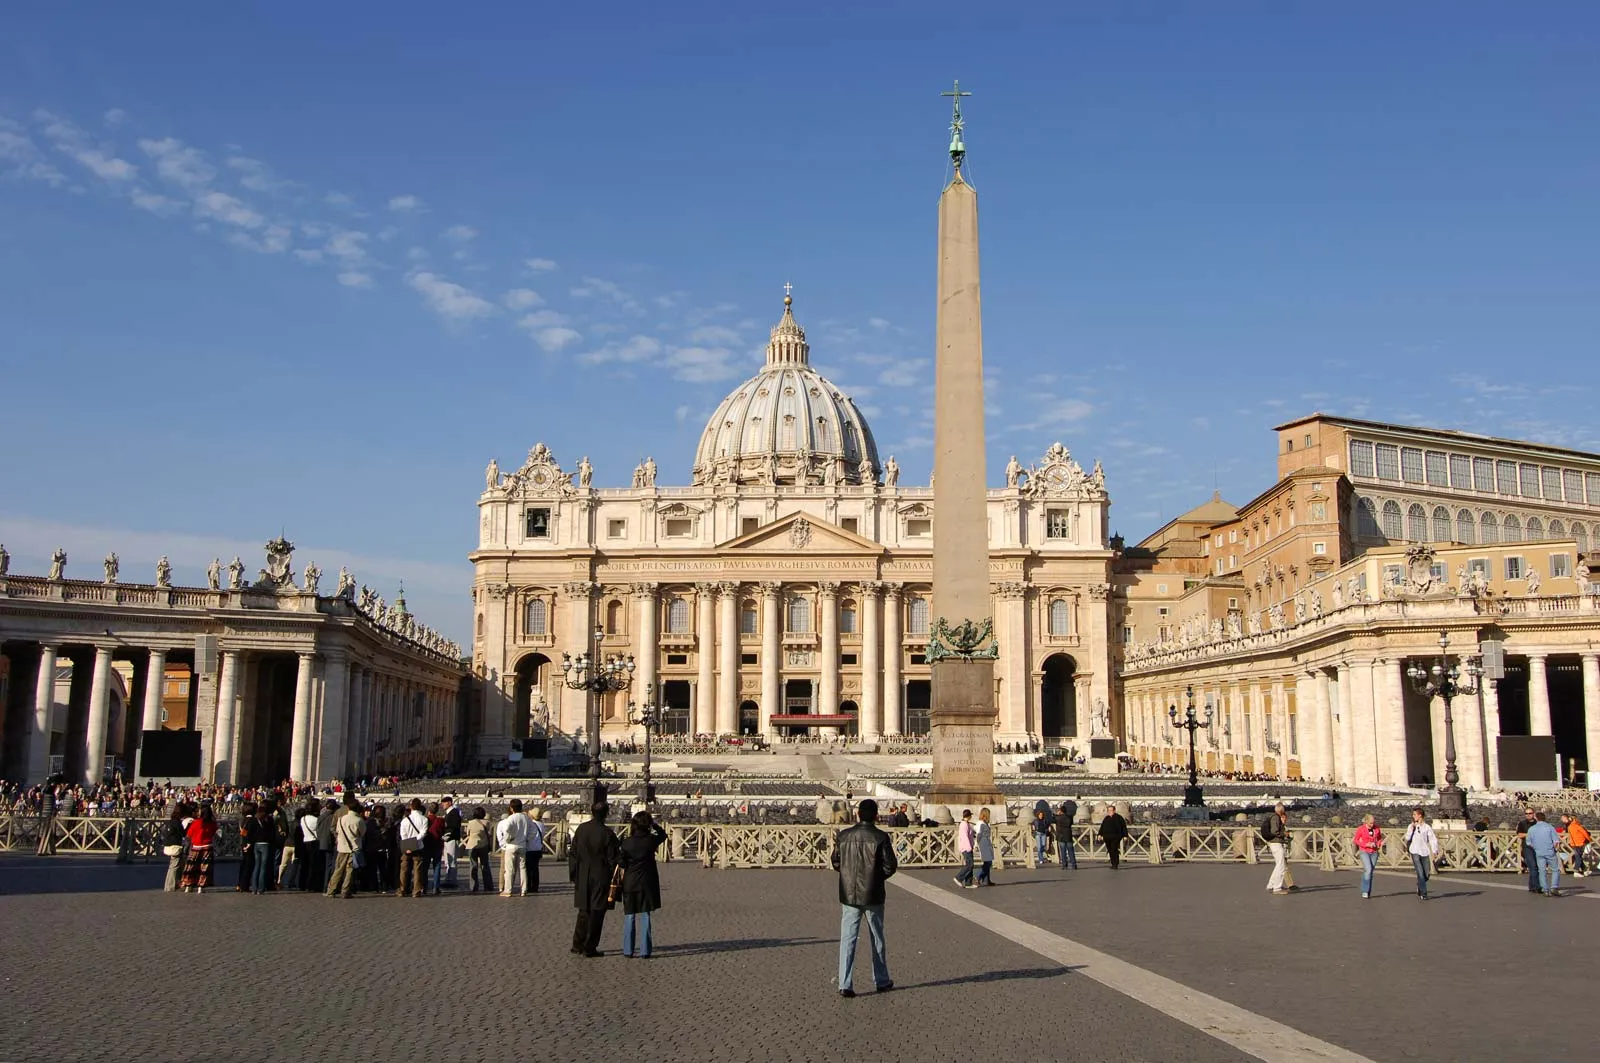 How Was The Location Of Saint Peter's Basilica Selected